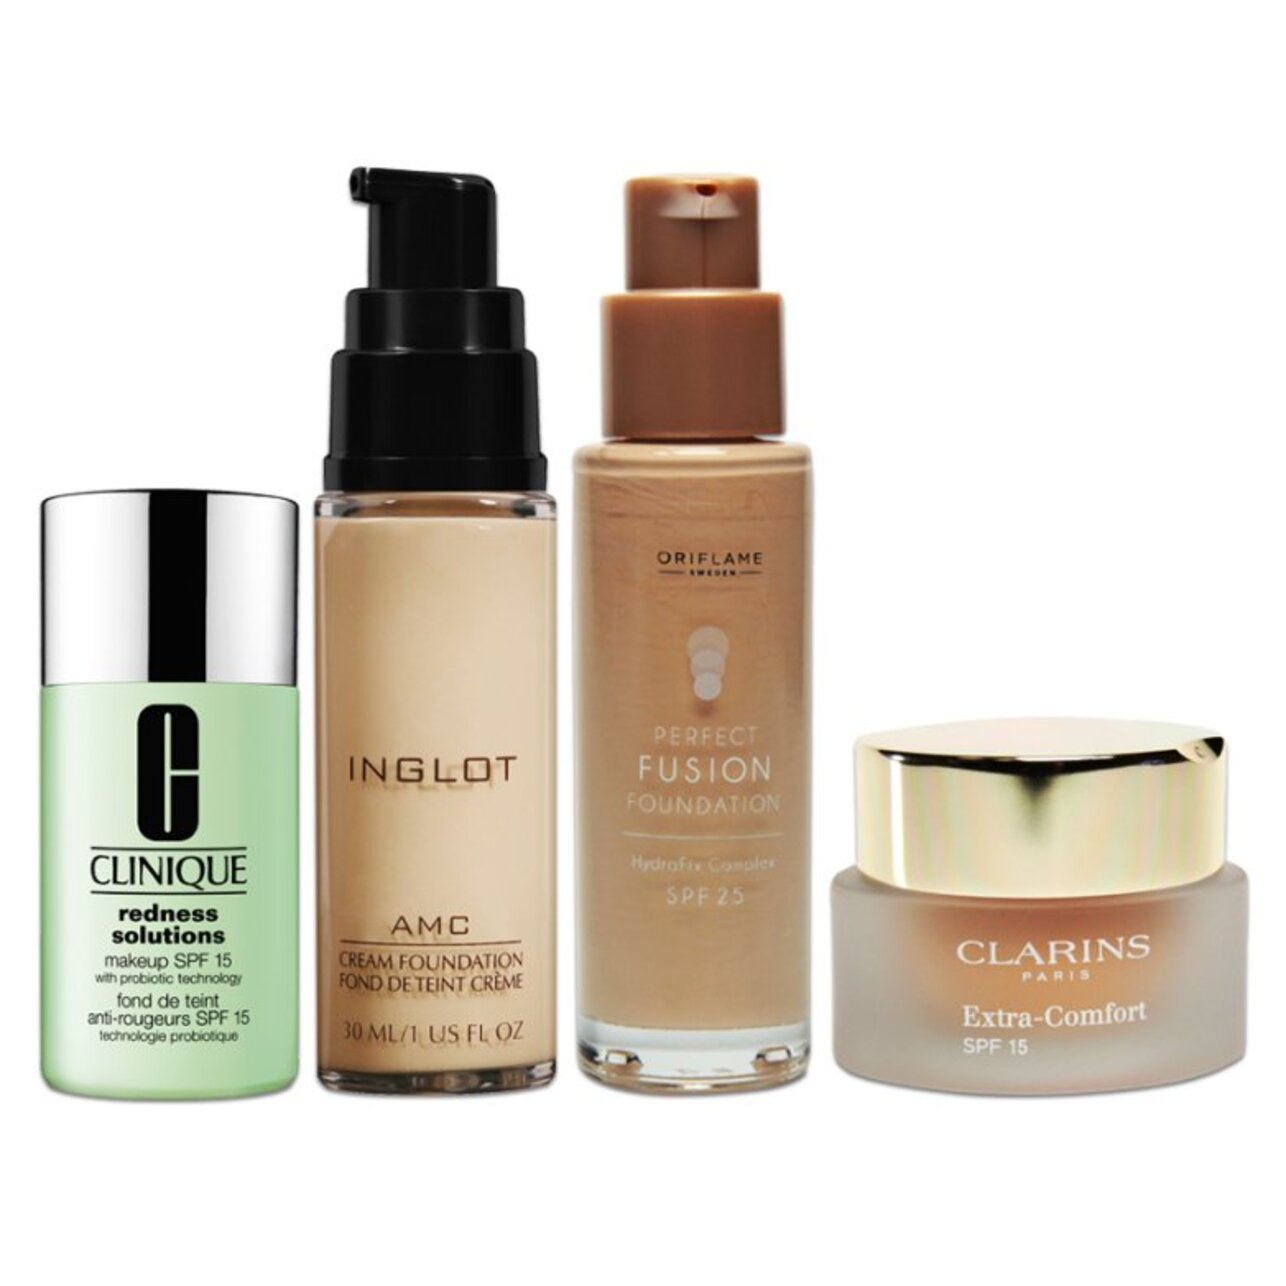 1.   Redness Solutions Makeup SPF 15 with Probiotic Technology, Clinique; 2.  -, Inglot; 3.    , Oriflame; 3.   Extra-Comfort, Clarins